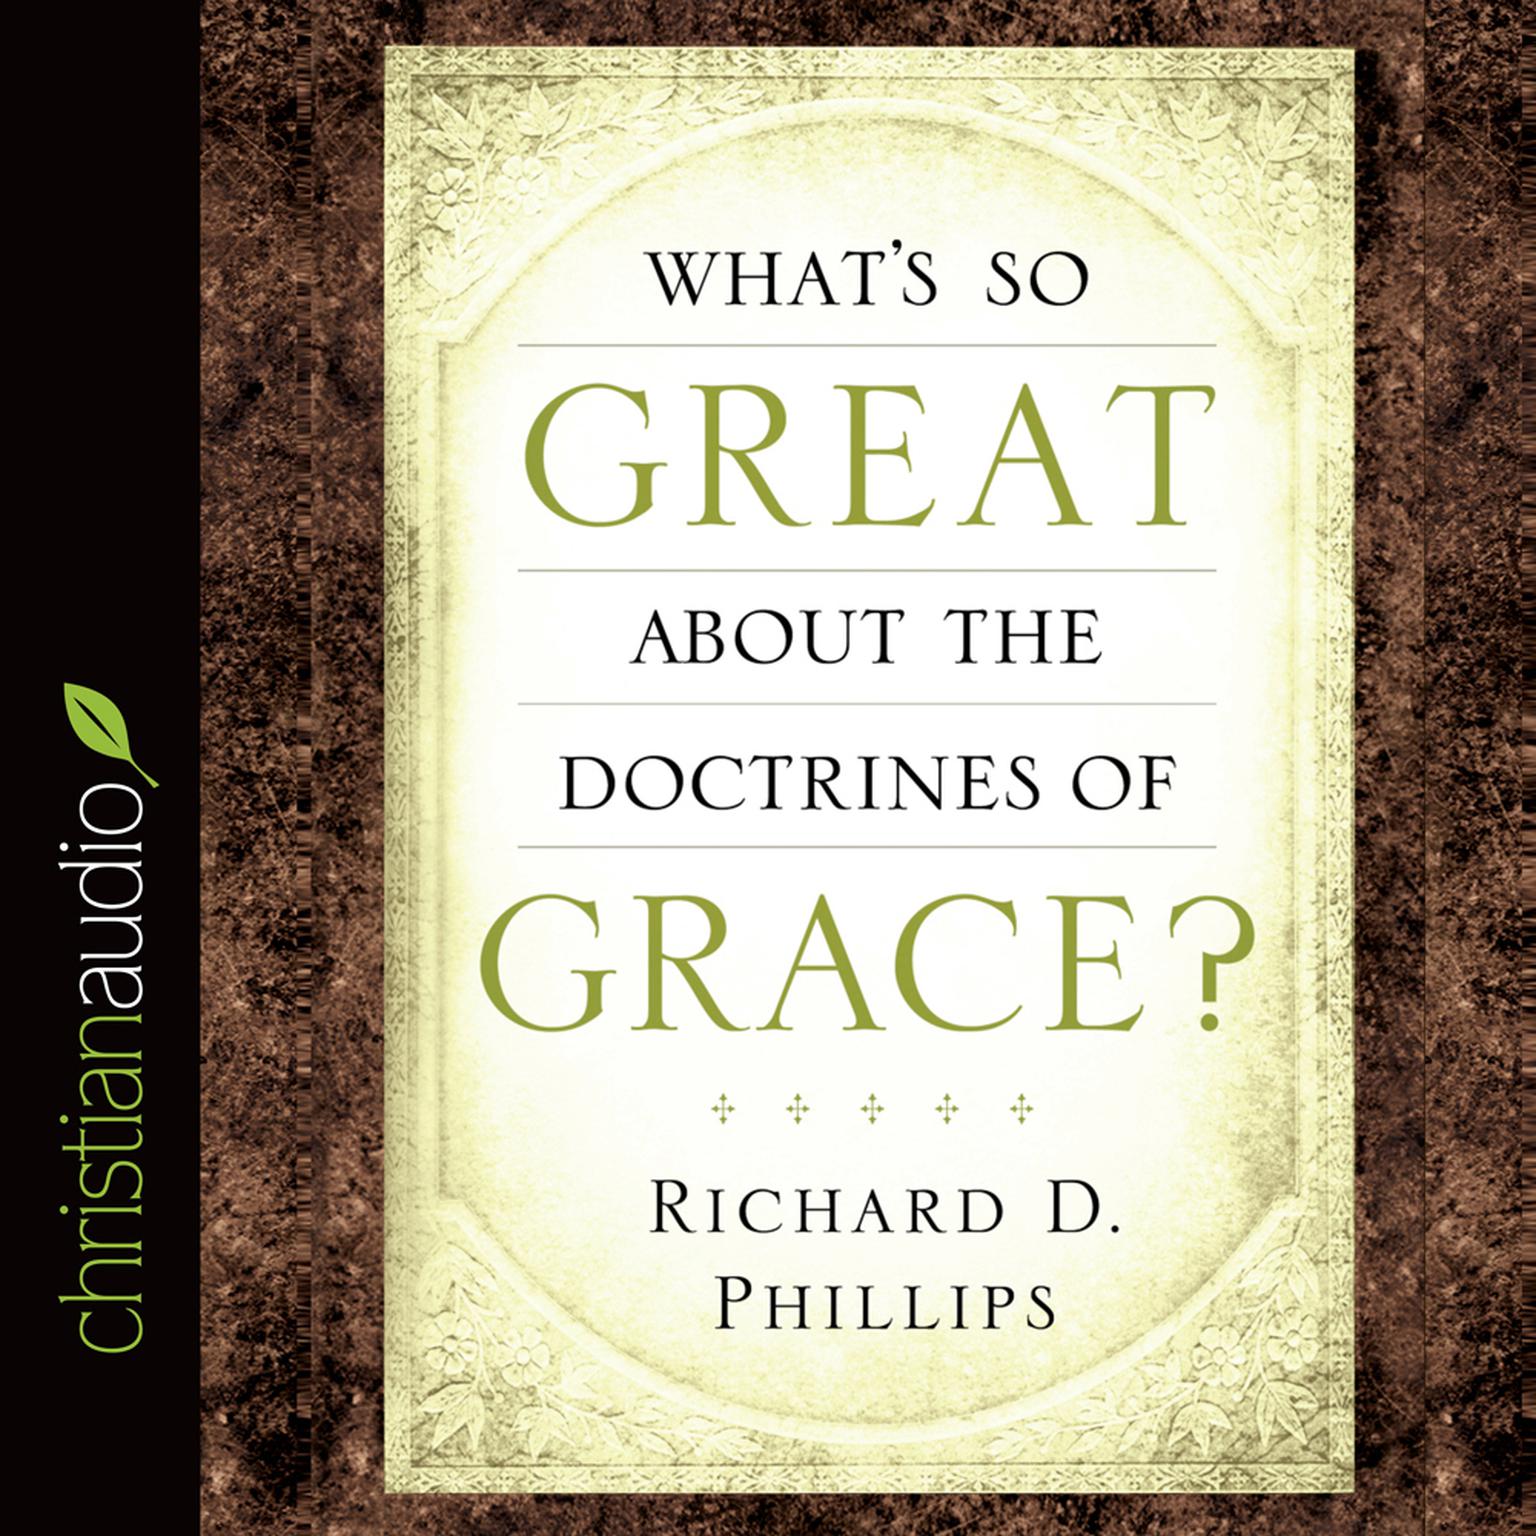 Whats So Great About the Doctrines of Grace? Audiobook, by Richard D. Phillips